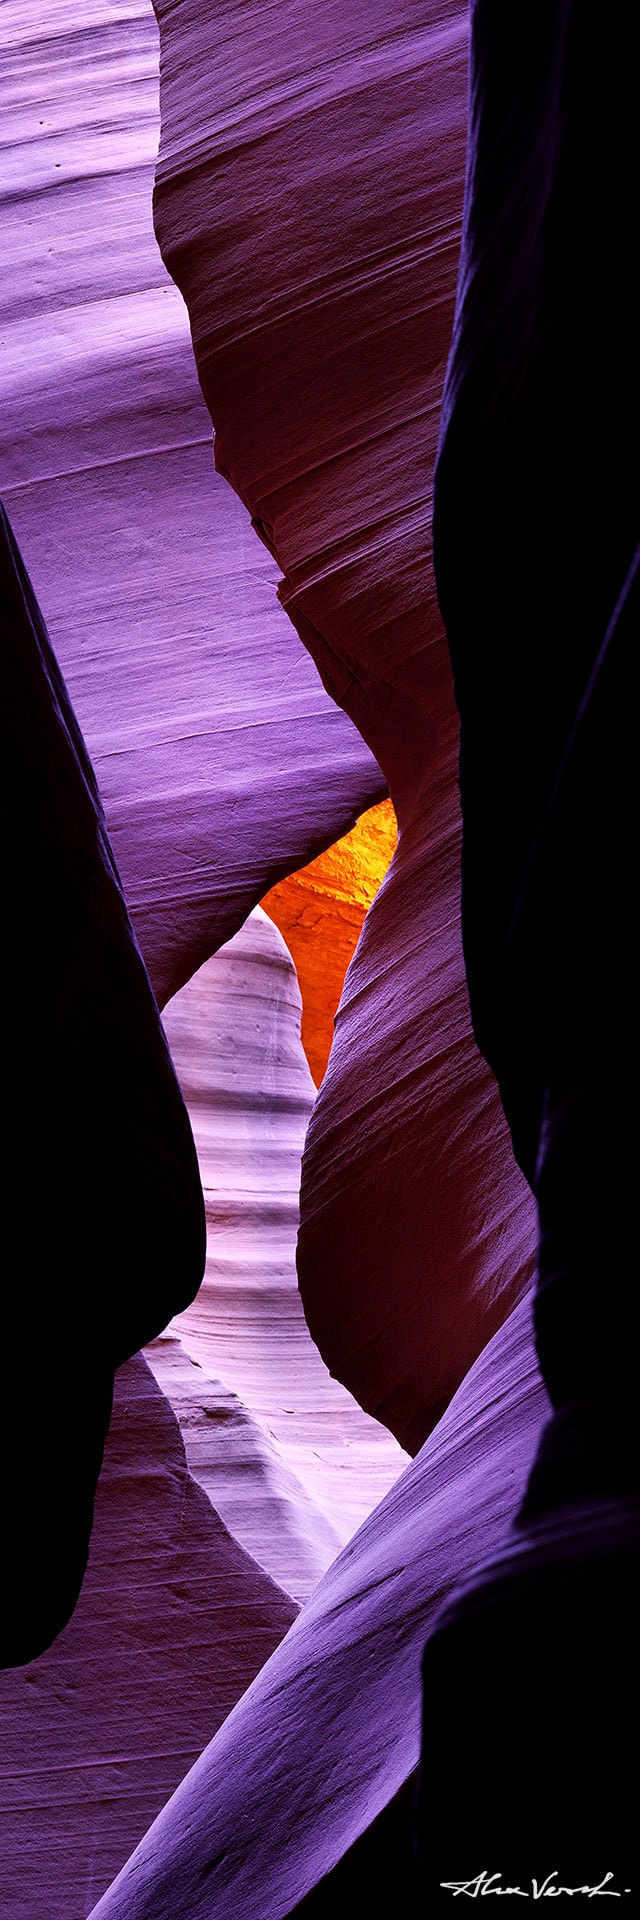 Alexander Vershinin, Antelope canyon, arizona landscape photography, page, abstract, Limited edition, Fine Art, The Intuition, night shot, photo